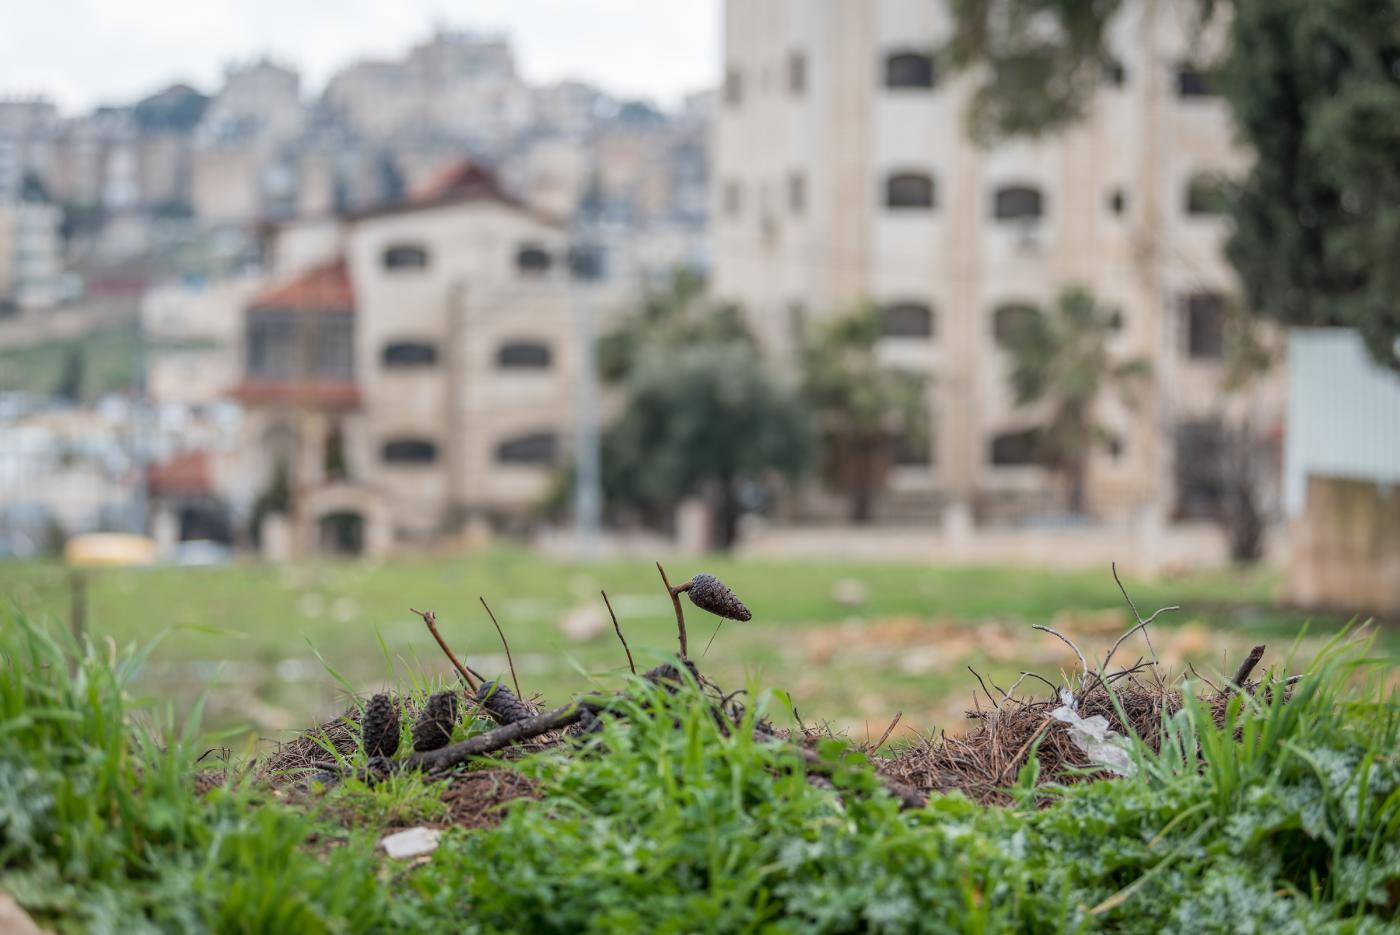 Patch of grass in the foreground with blurry beige coloured concrete buildings seen in the distance in the background. 